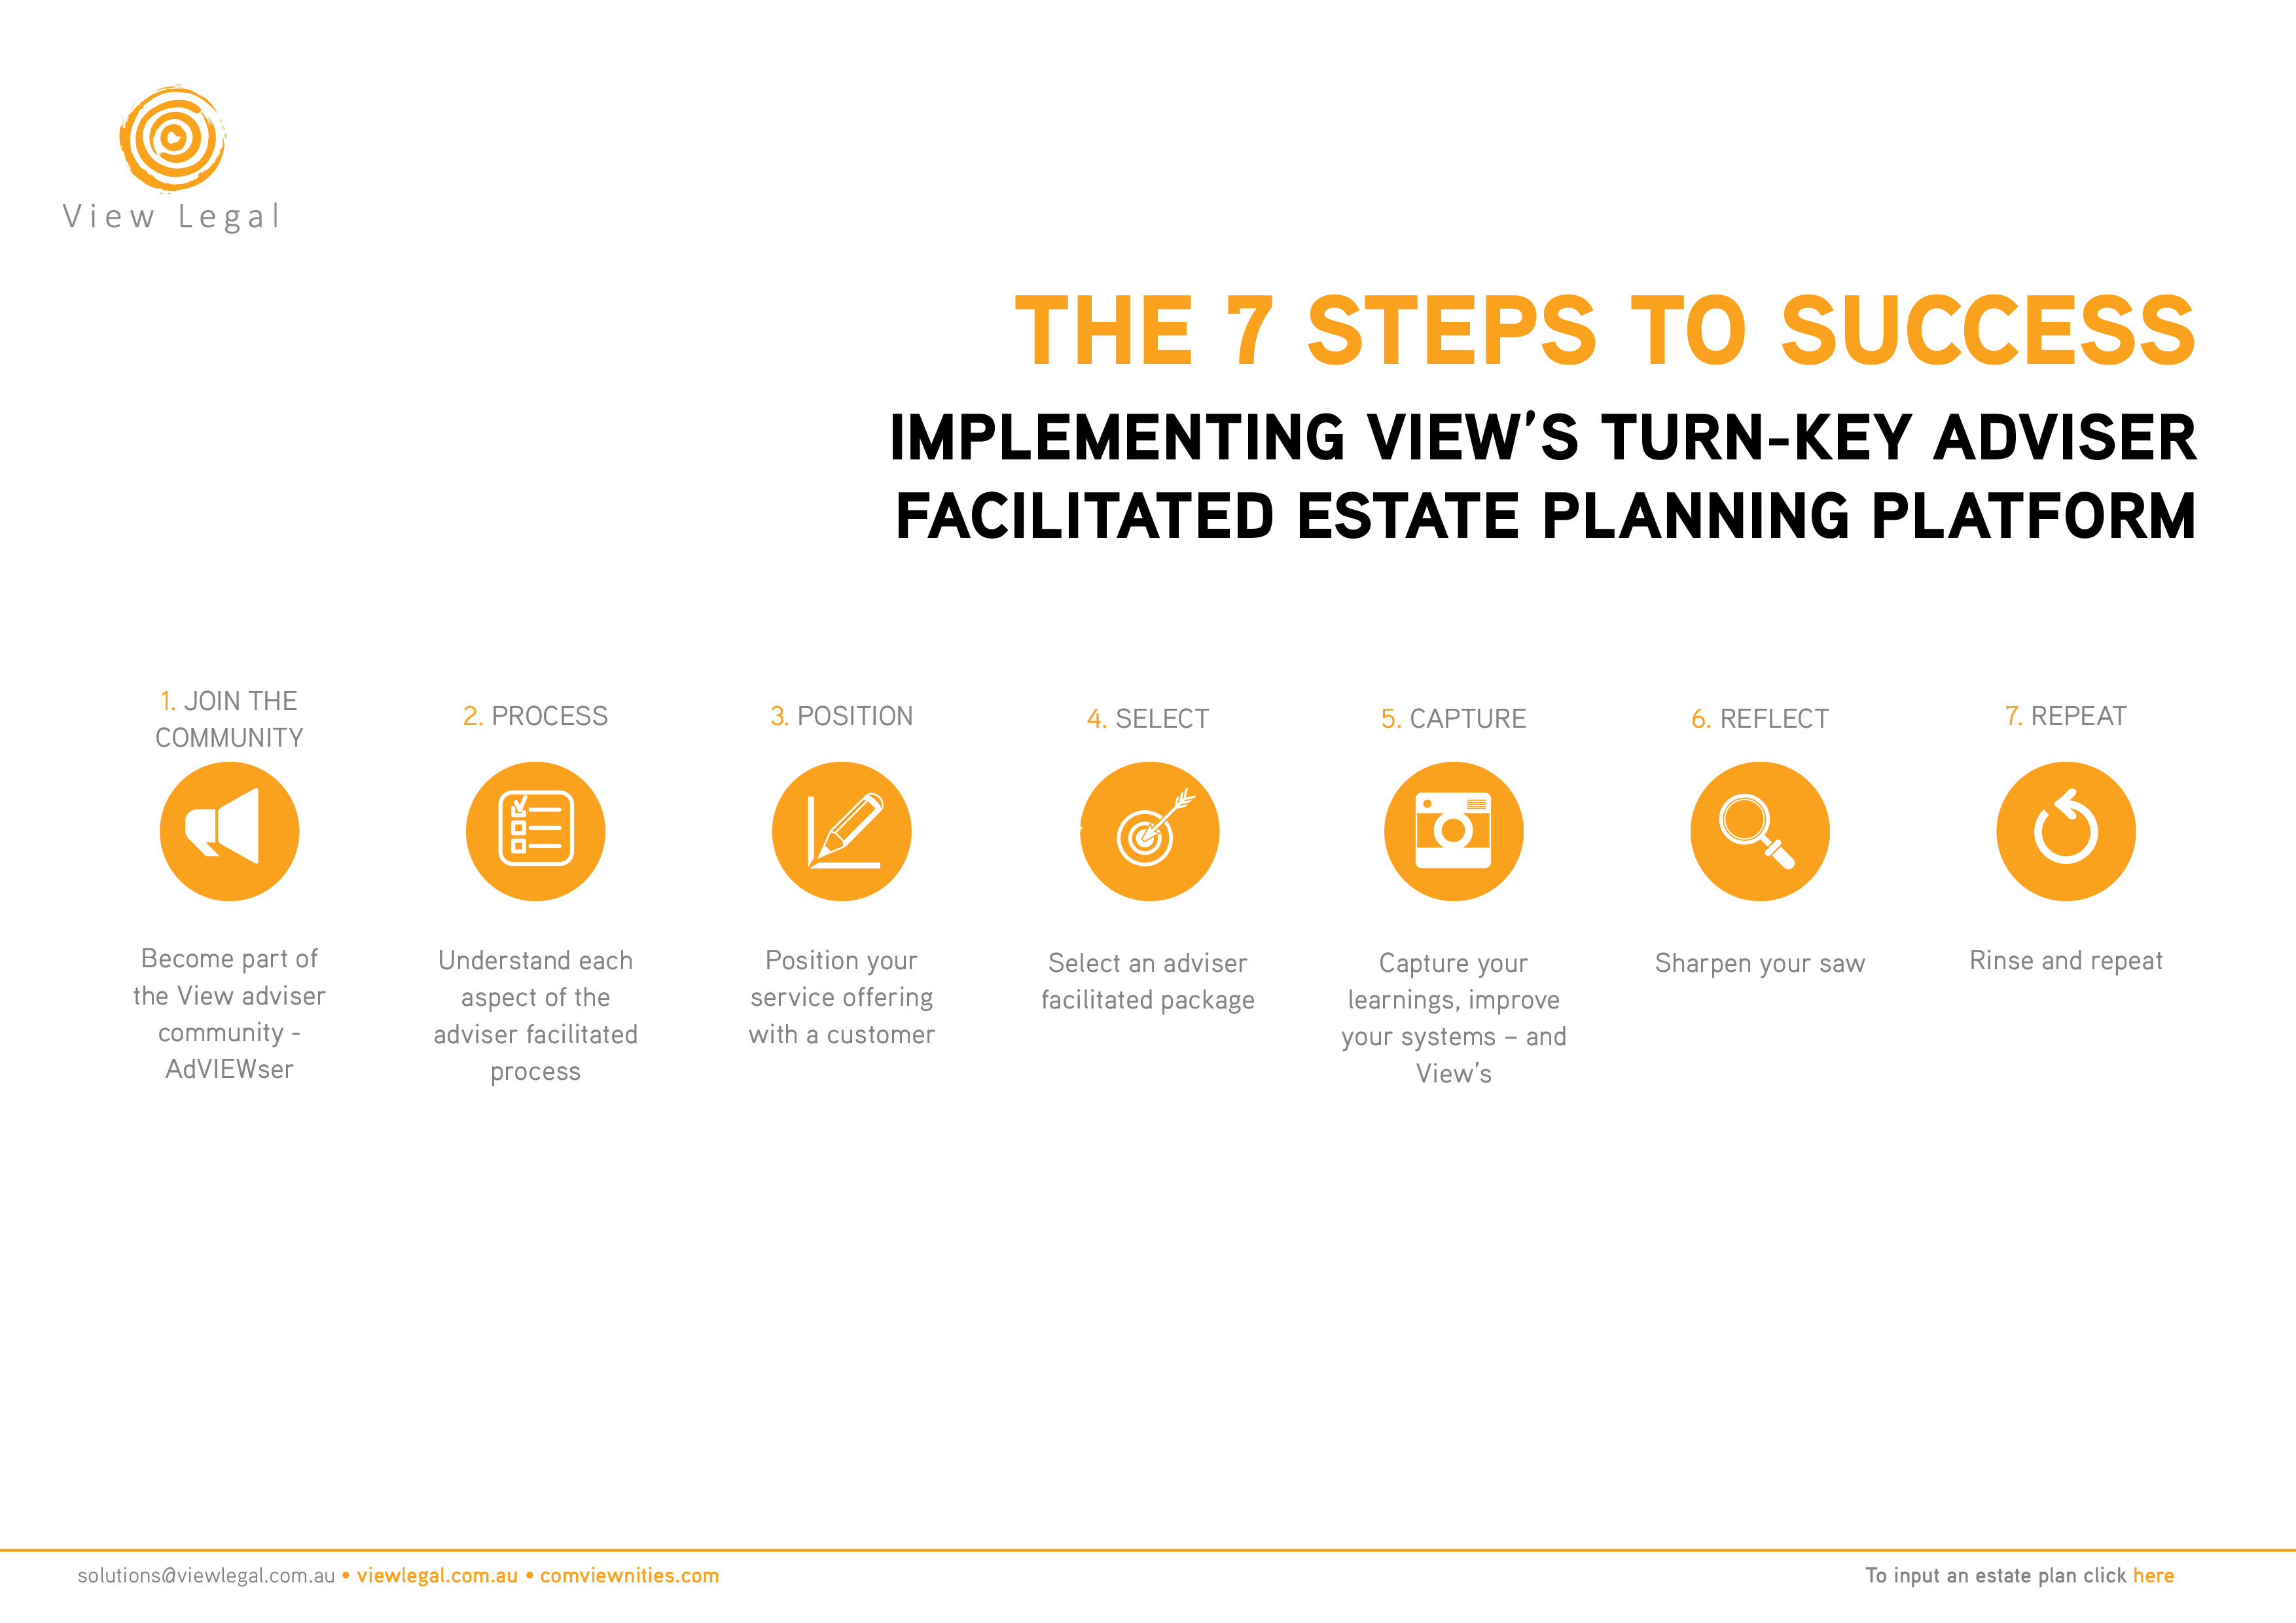 The 7 Steps to Success – Implementing View’s Turn-key Adviser Facilitated Estate Planning Platform